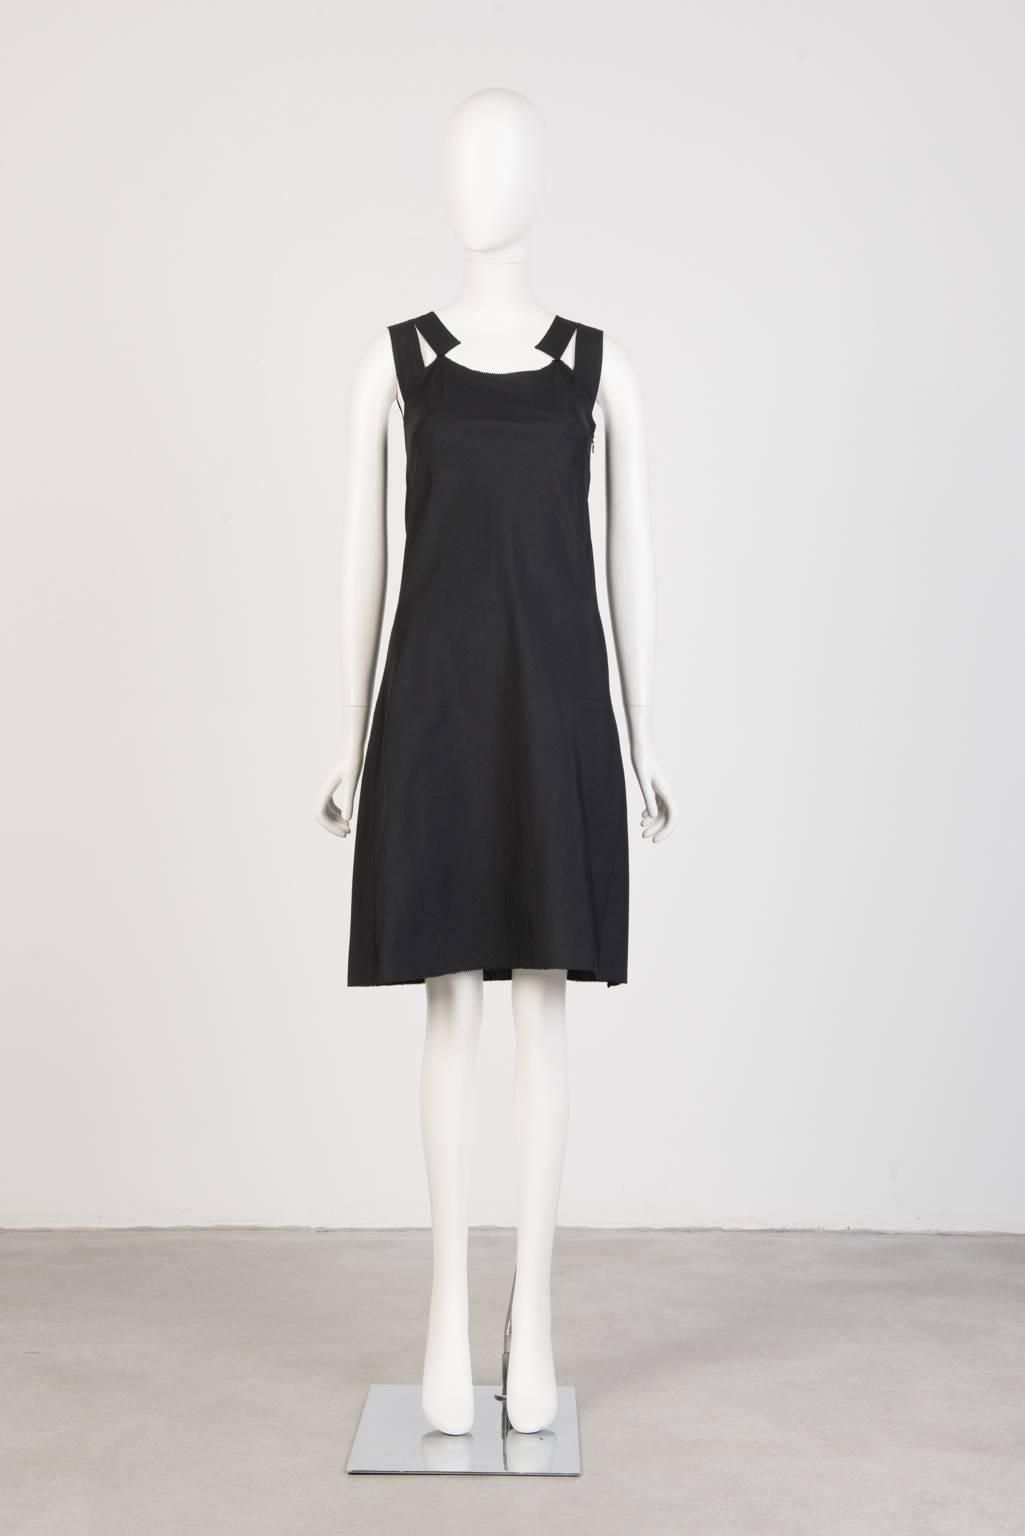 Sleeveless, knee-length cotton/linen dress with side zip and stitch detailing on raw edged straps and back collar.